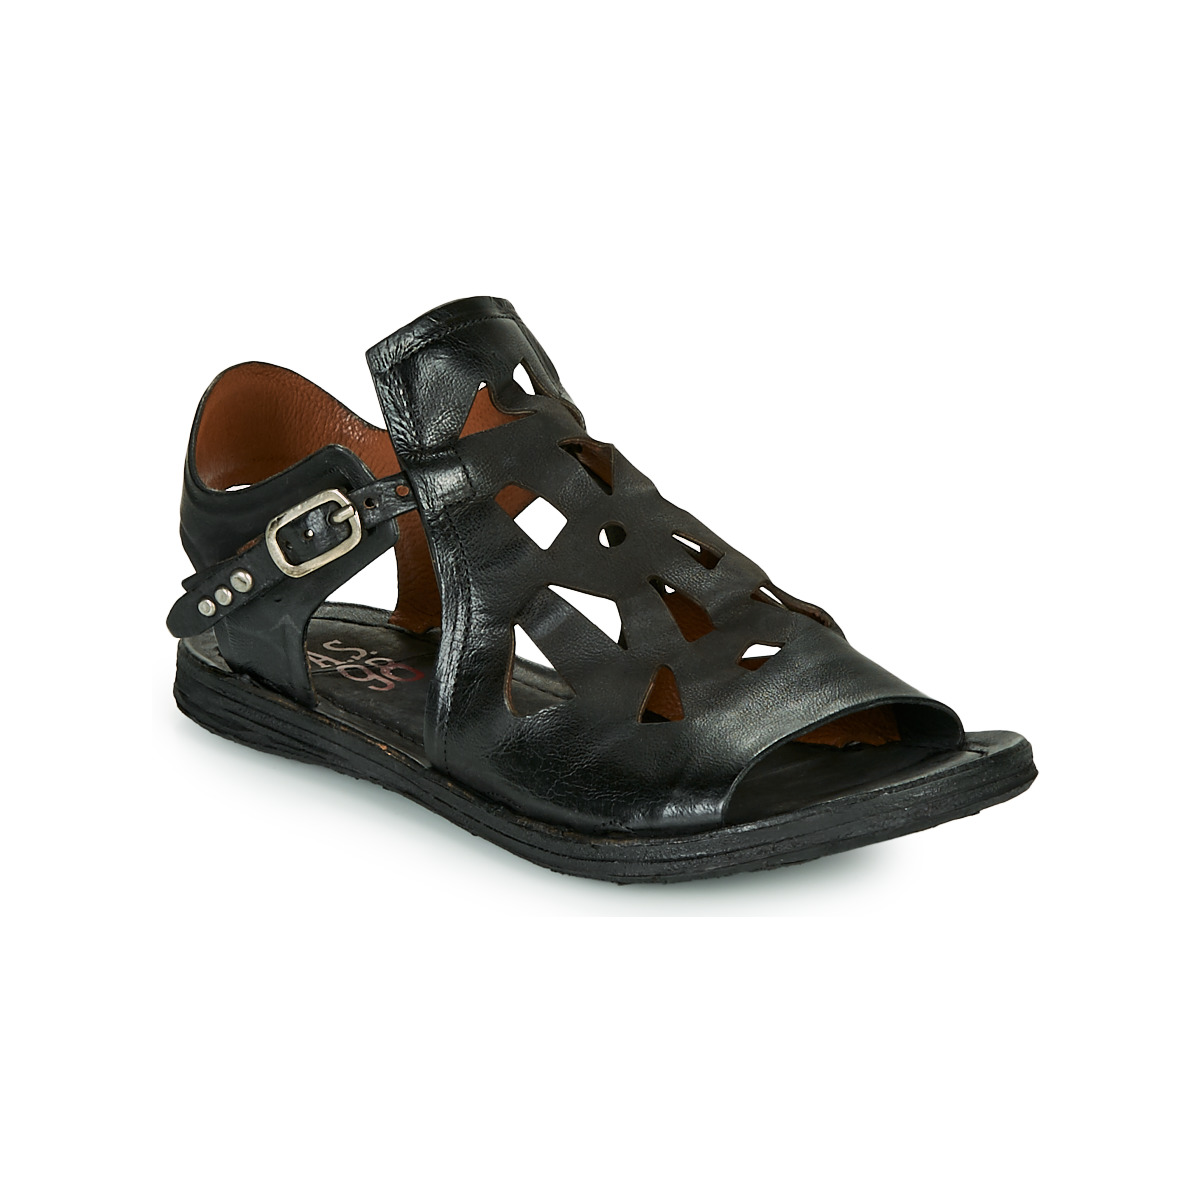 airstep / a.s.98  ramos perf  women's sandals in black